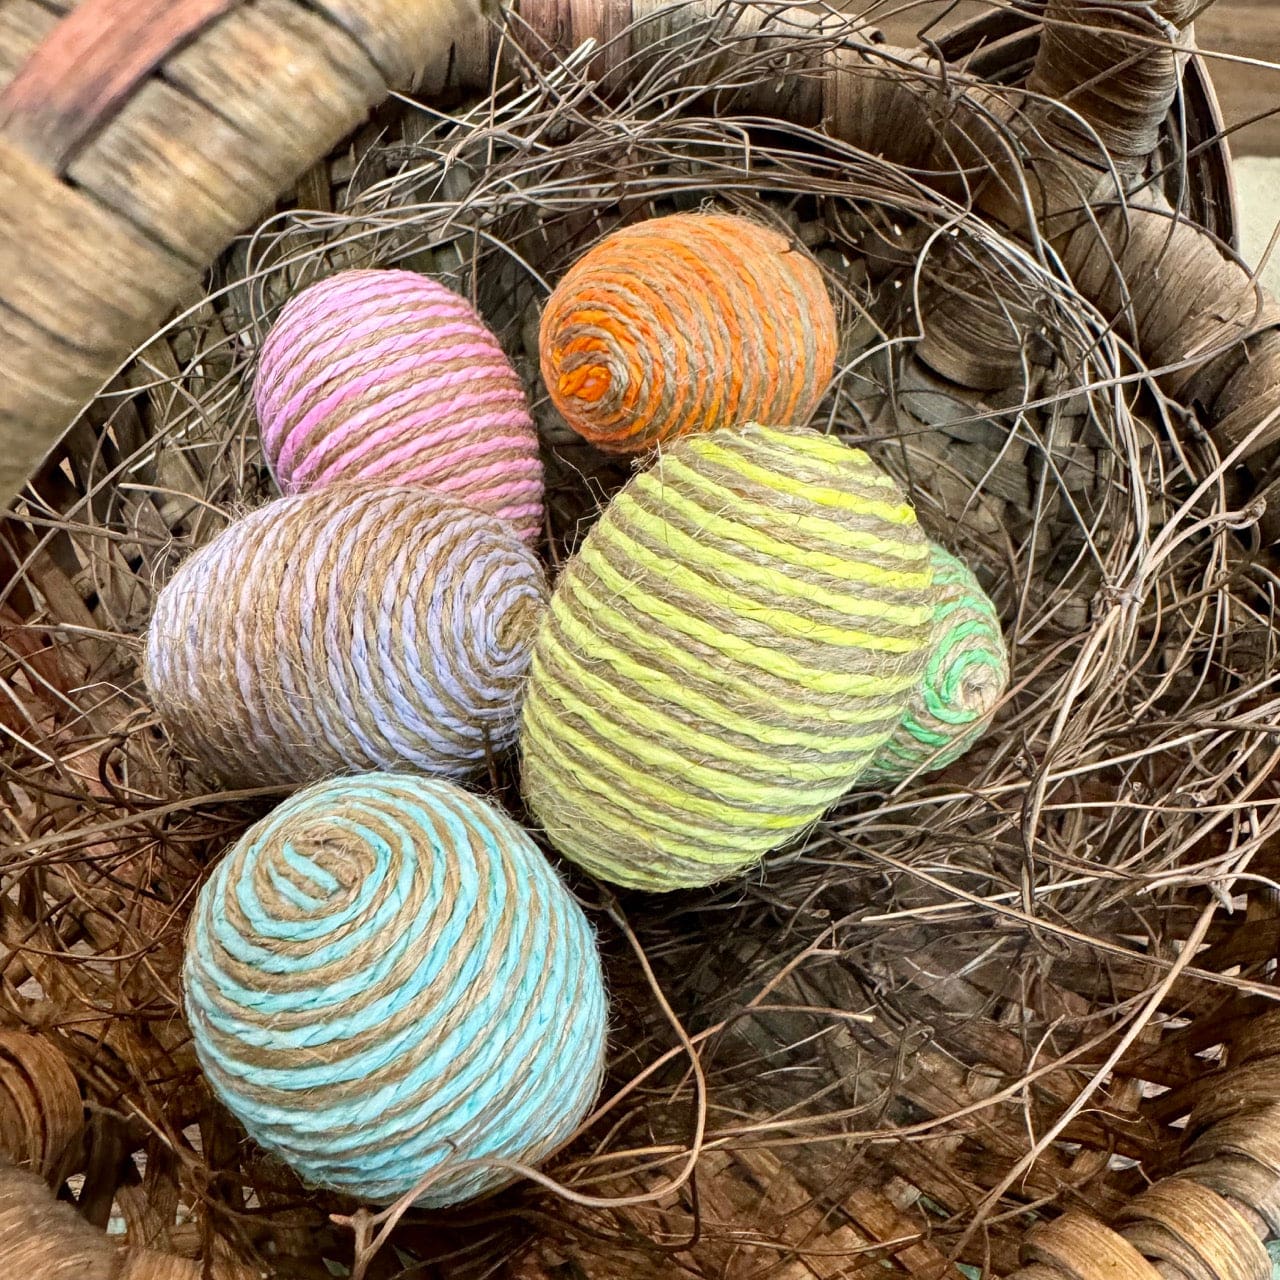 Twine Colored Eggs - Set of 6 Decor, Easter Eggs, Farmhouse Decorating, Farmhouse Spring Decor, Farmhouse Spring Decorating, New, Spring Decor, Spring Decorating, Spring Farmhouse Decor, Spring Home Decor 